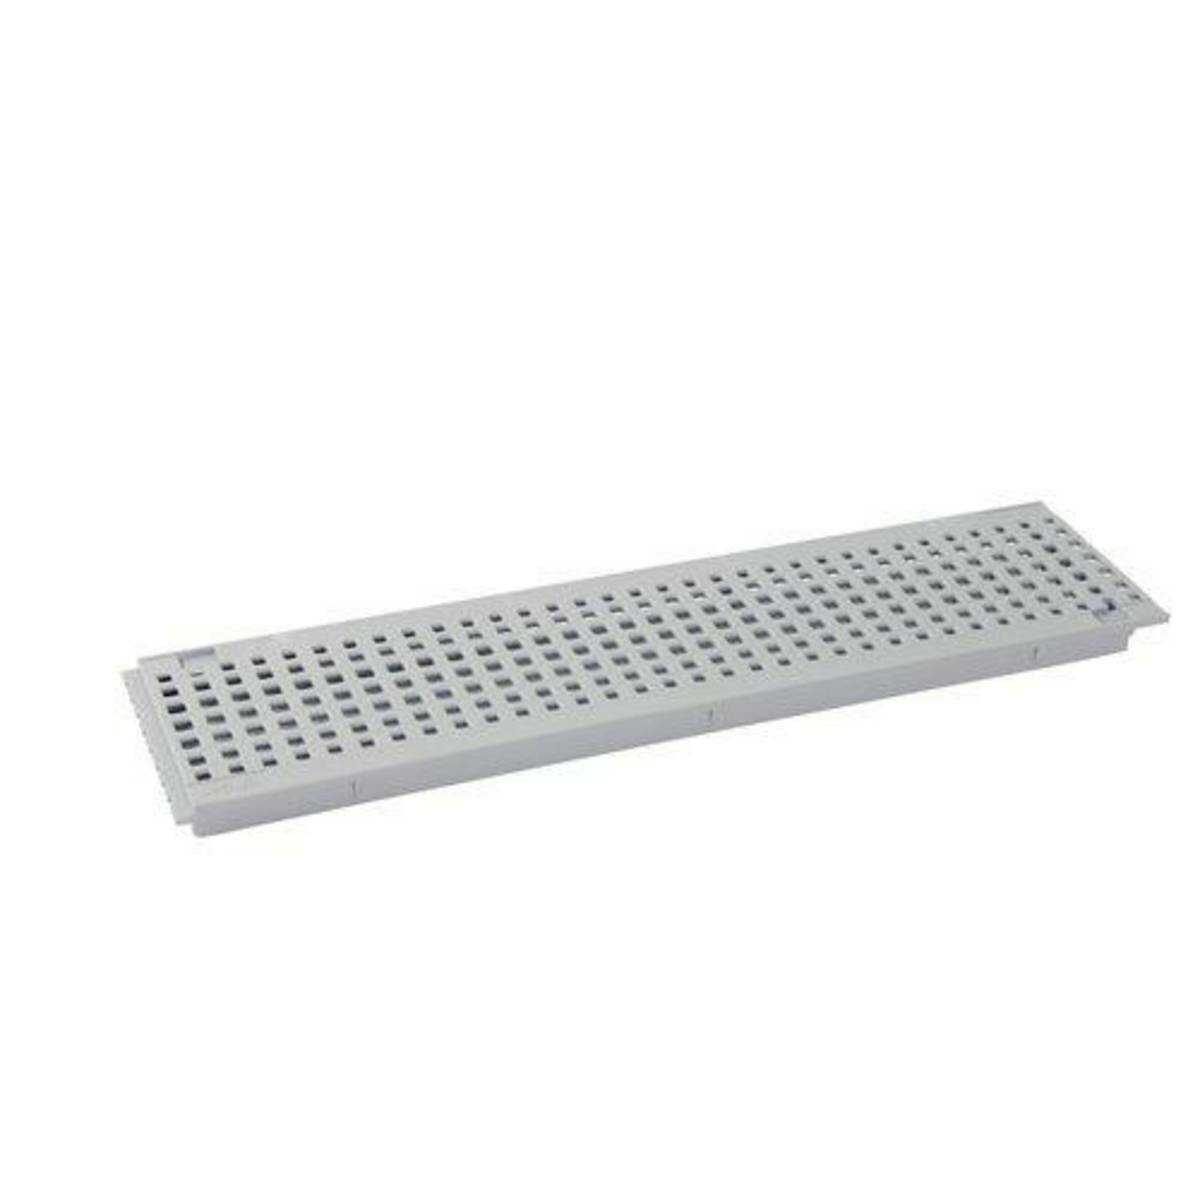 GRILLE CANIV.PISCINE 0.5M LARG.130 A15 GRIS